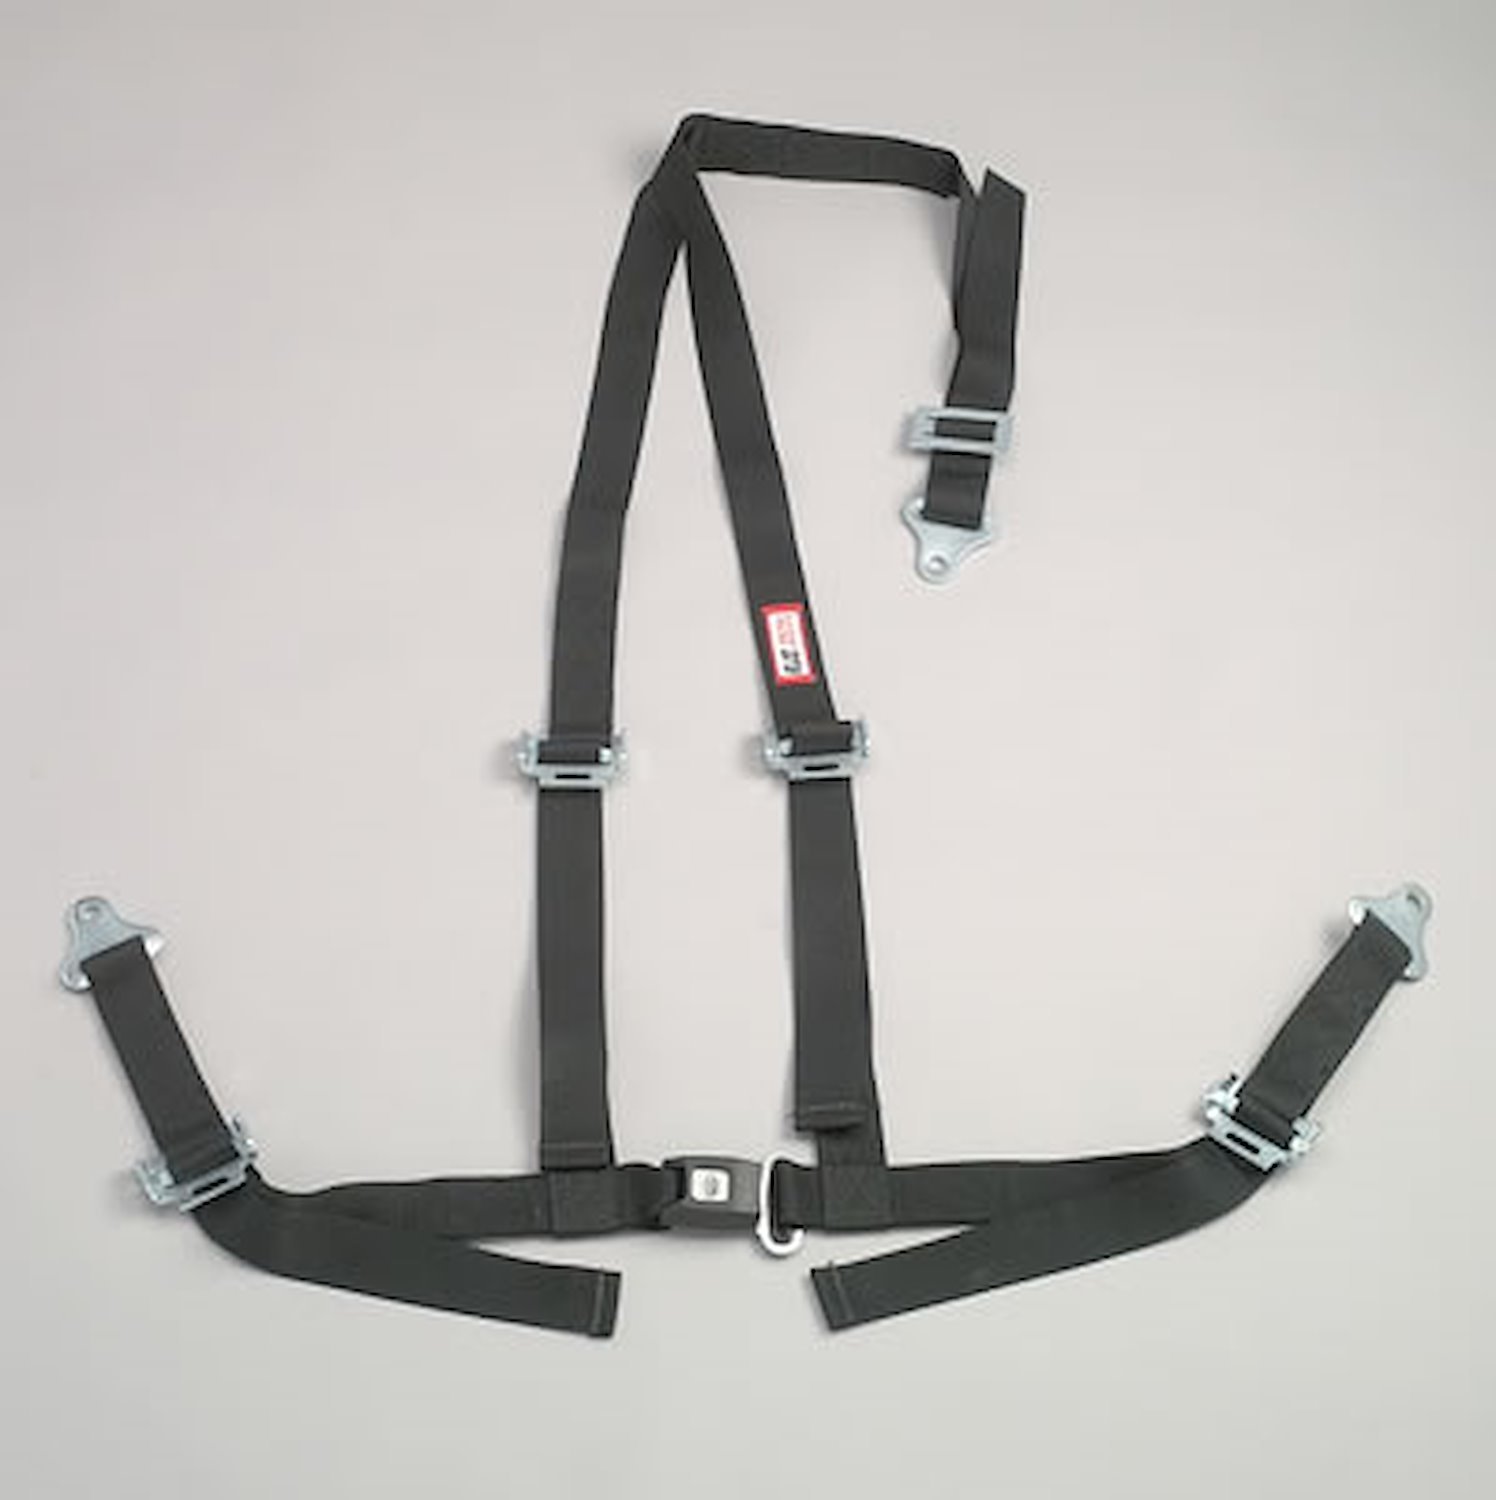 NON-SFI B&T HARNESS 2 PULL DOWN Lap Belt SNAP 2 S. H. Individual FLOOR Mount WRAP/BOLT w/STERNUM STRAP YELLOW